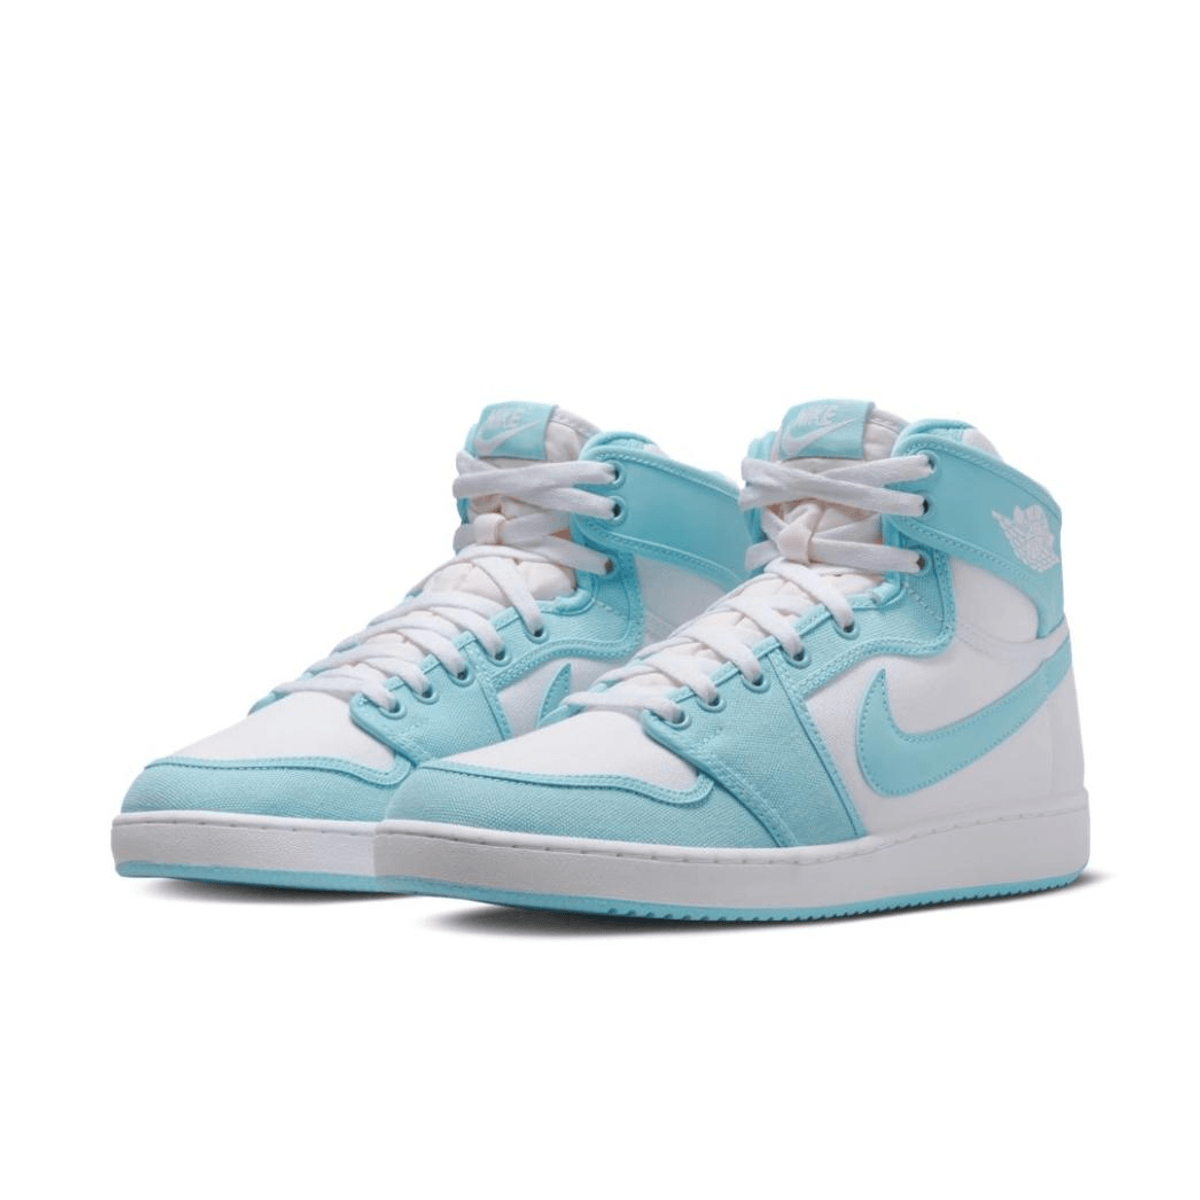 The Air Jordan 1 KO Bleached Aqua Is A Bright Addition To Any Summer Rotation